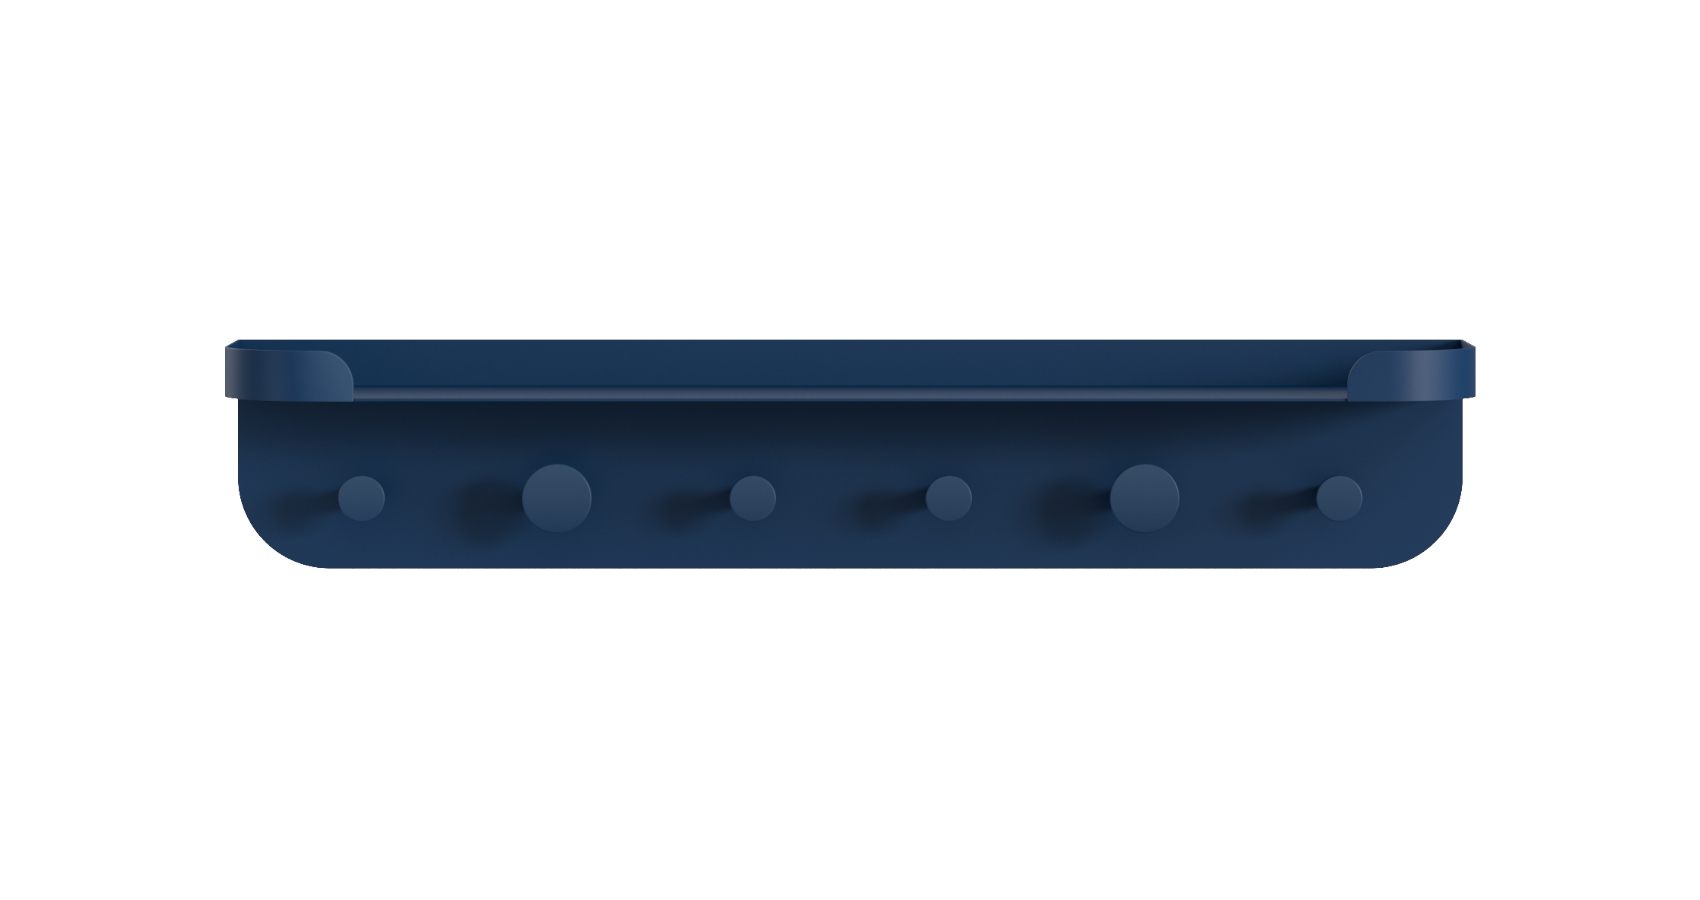 Buddi Coat Hook and Shelf in Navy in direct front view